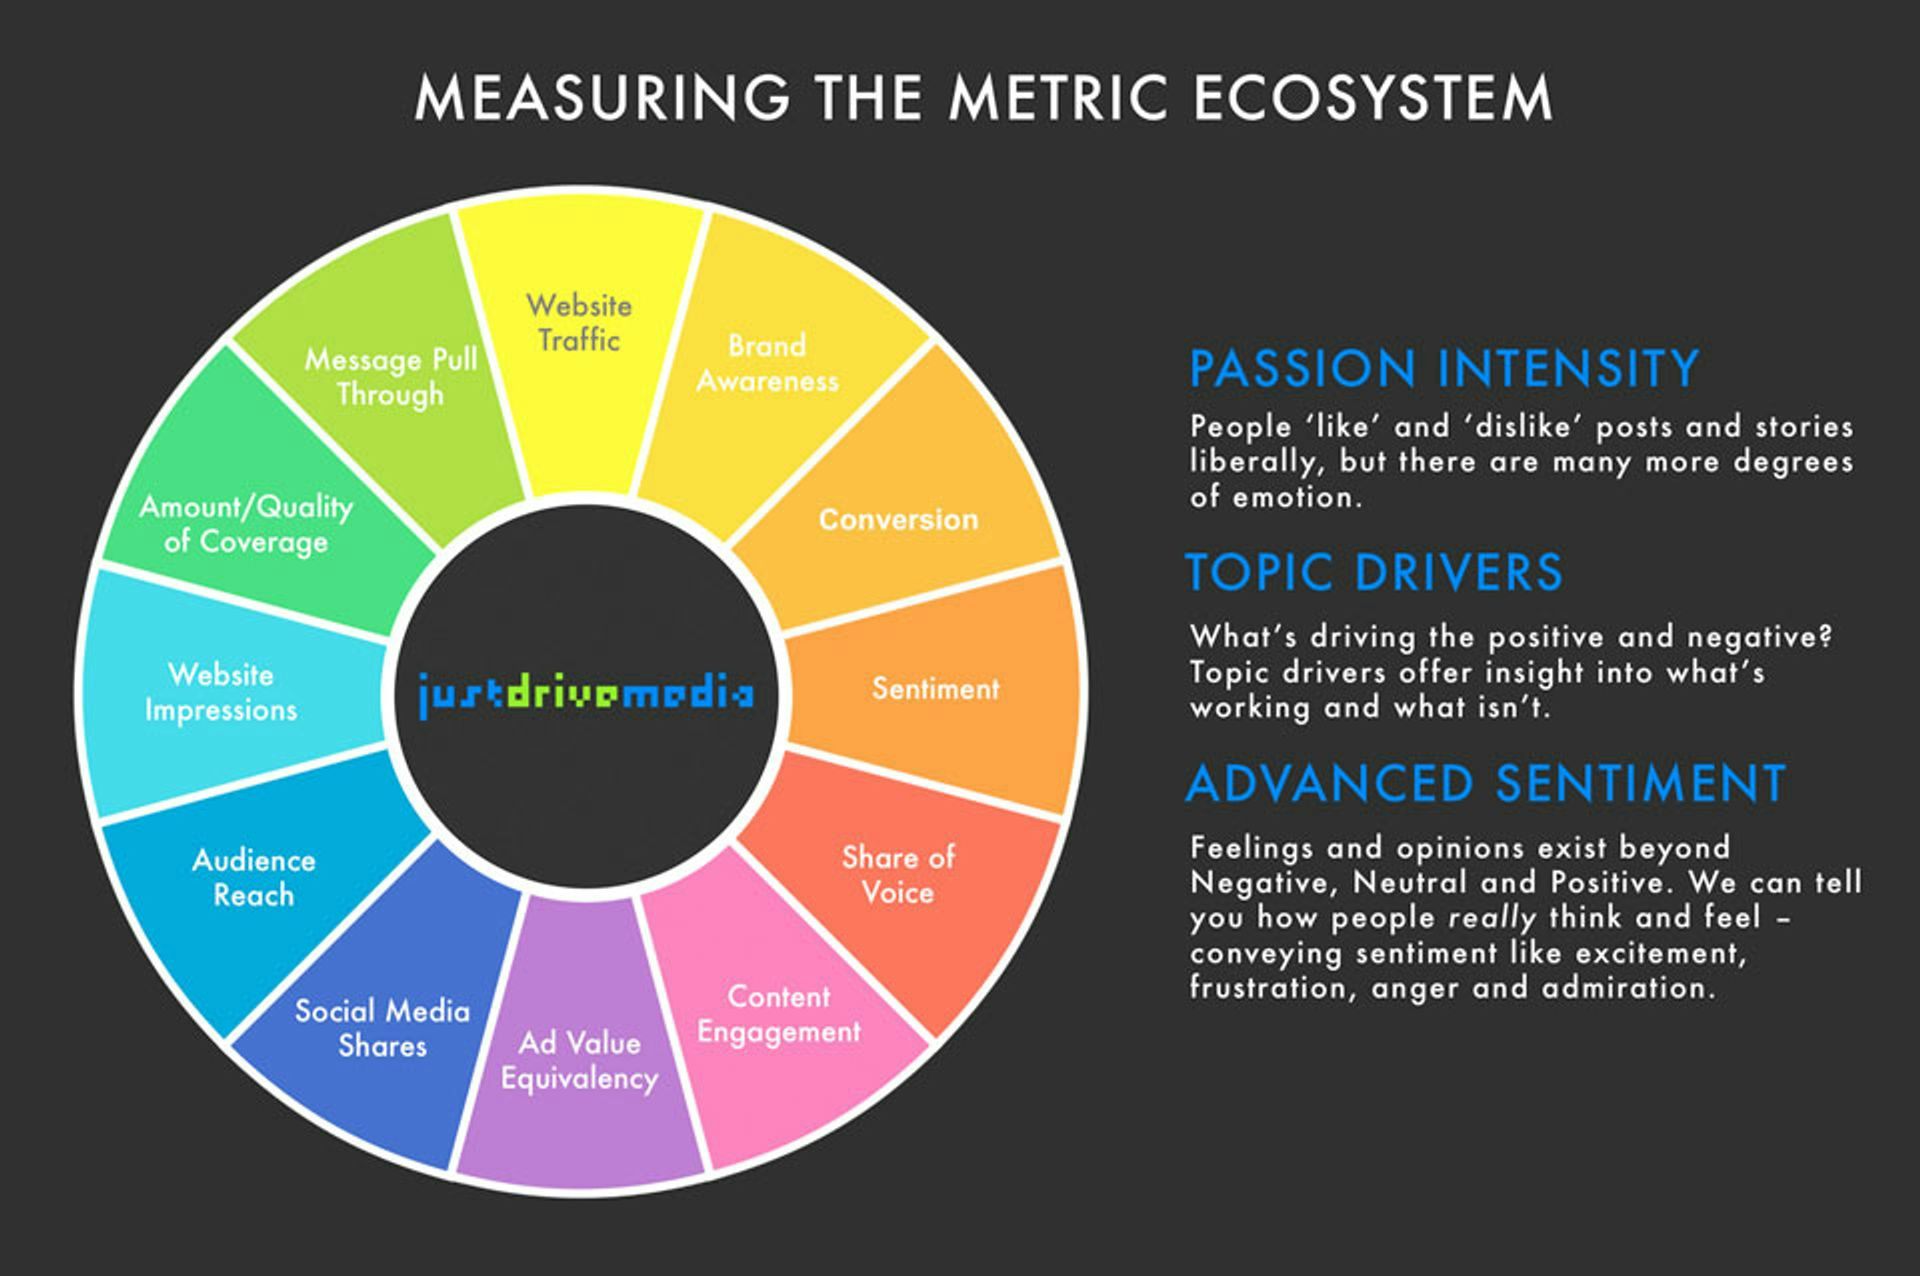 An infographic titled "Measuring the Metric Ecosystem" with segments for digital marketing metrics and explanations of sentiment analysis.